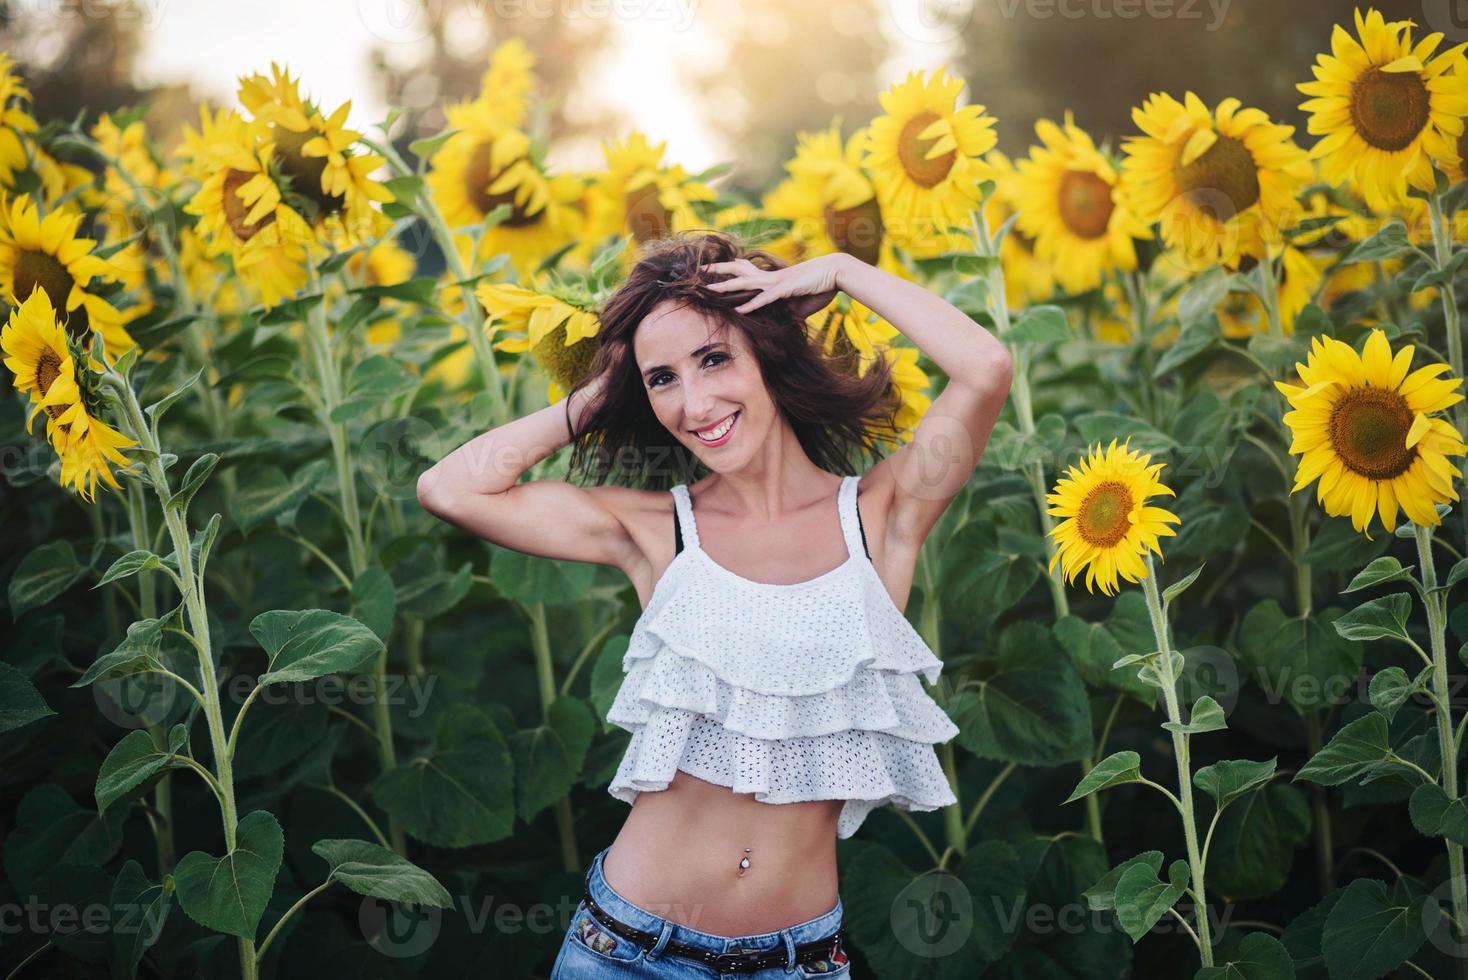 girl in the field of sunflowers outdoor photo